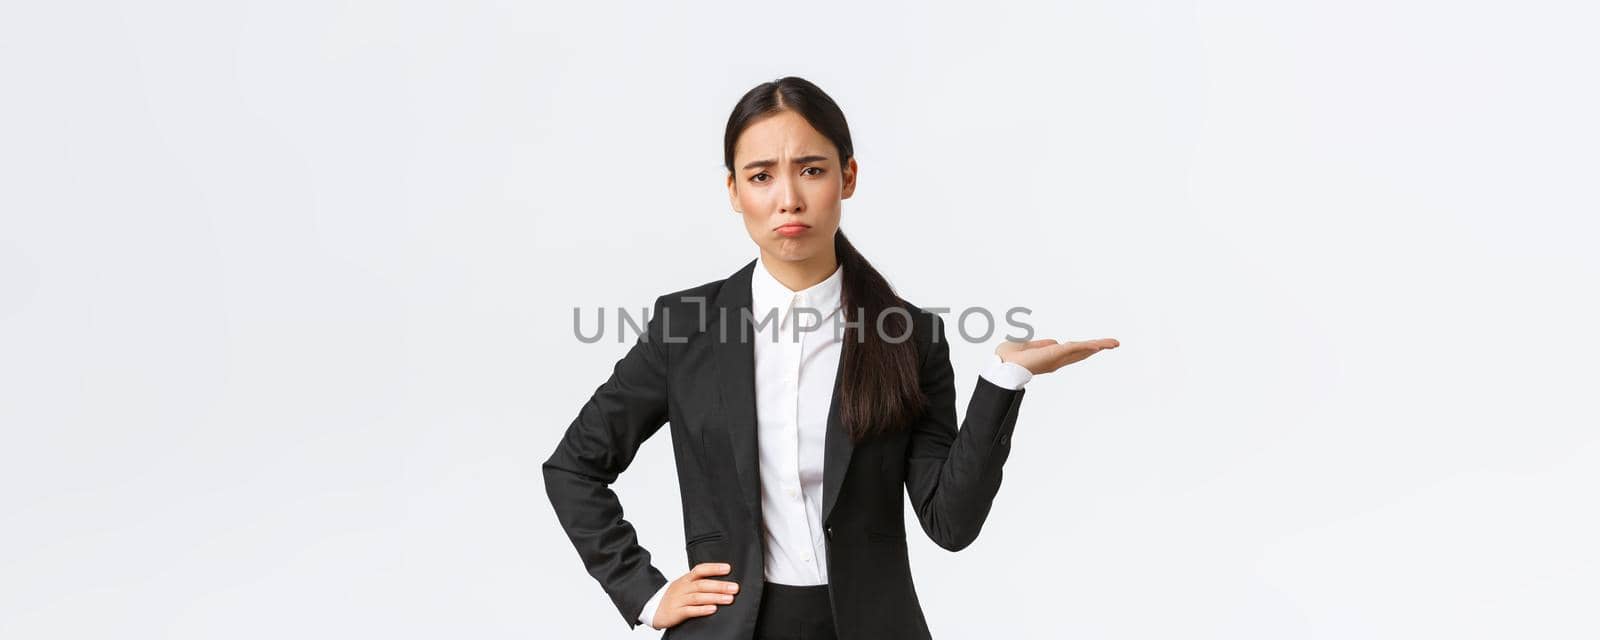 Disappointed and gloomy female sales manager, real estate agent in black suit having bad day, pouting and look upset while showing something, holding hand to the right, white background.